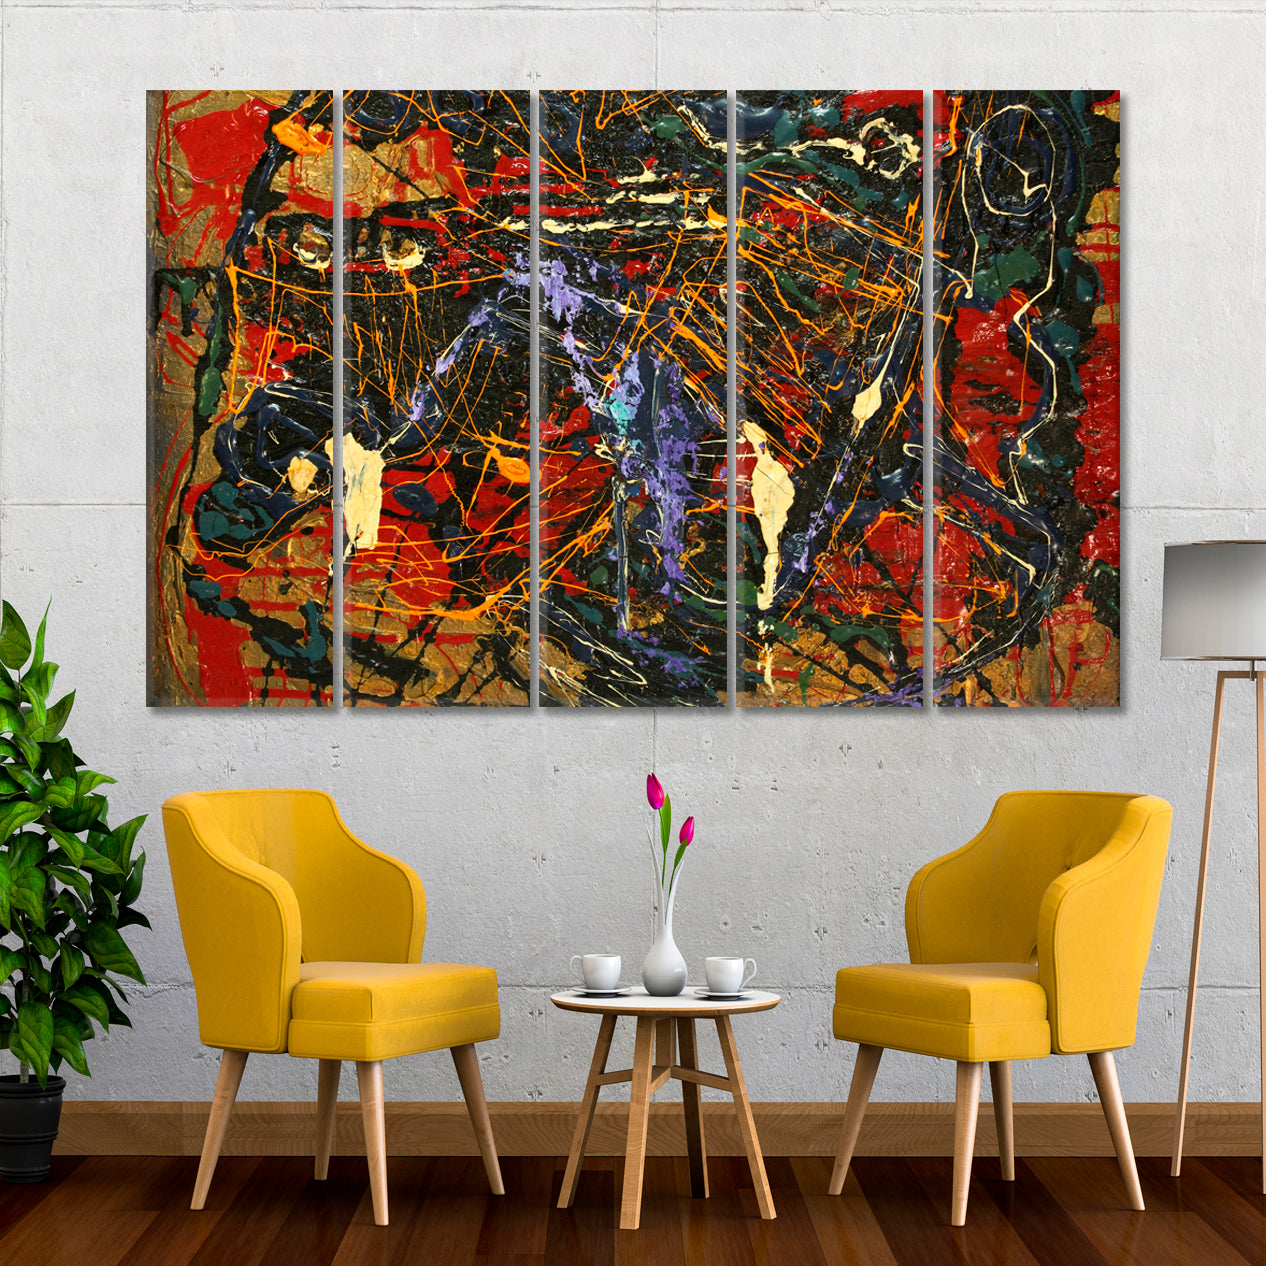 Abstract Colorful Mixing Techniques Contemporary Art Artesty 5 panels 36" x 24" 